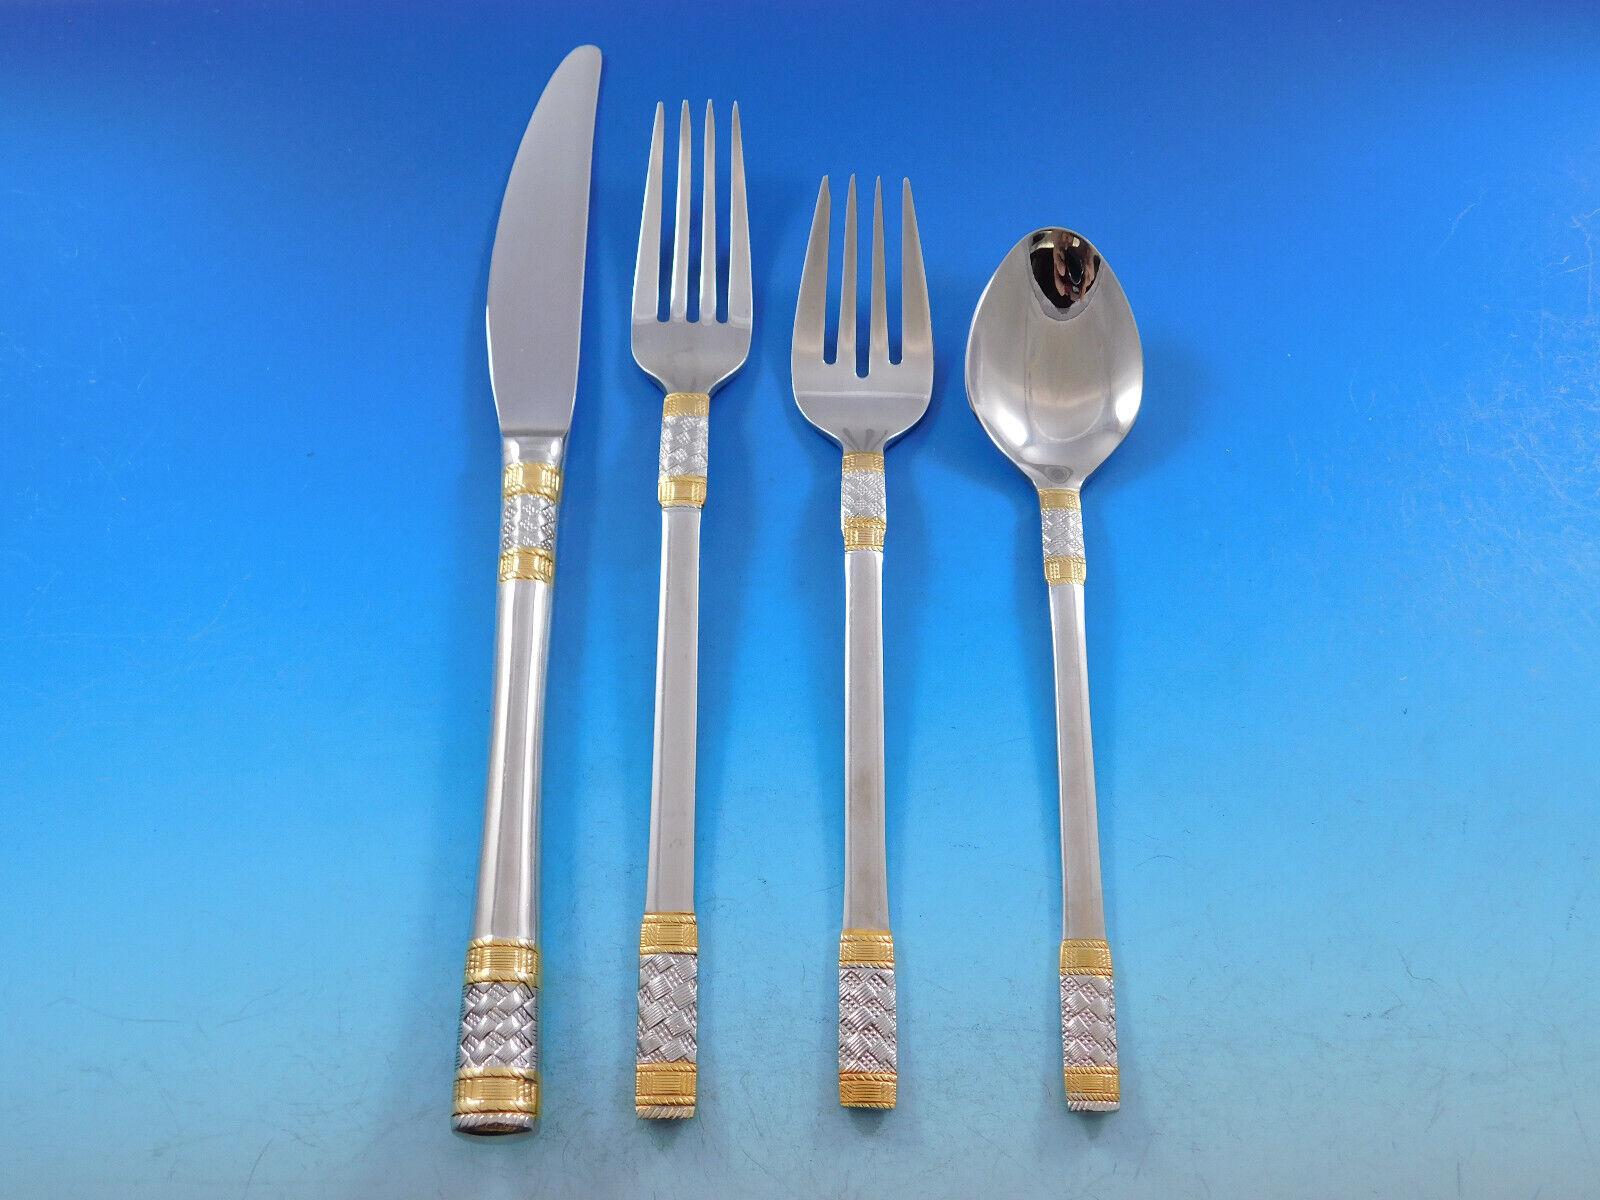 Golden Corsica 18/10 stainless steel flatware set, 53 pieces. This is Wallace's stainless with gold accent version of the sterling Golden Aegean Weave pattern. This set includes:

8 Dinner Knives, 9 1/2